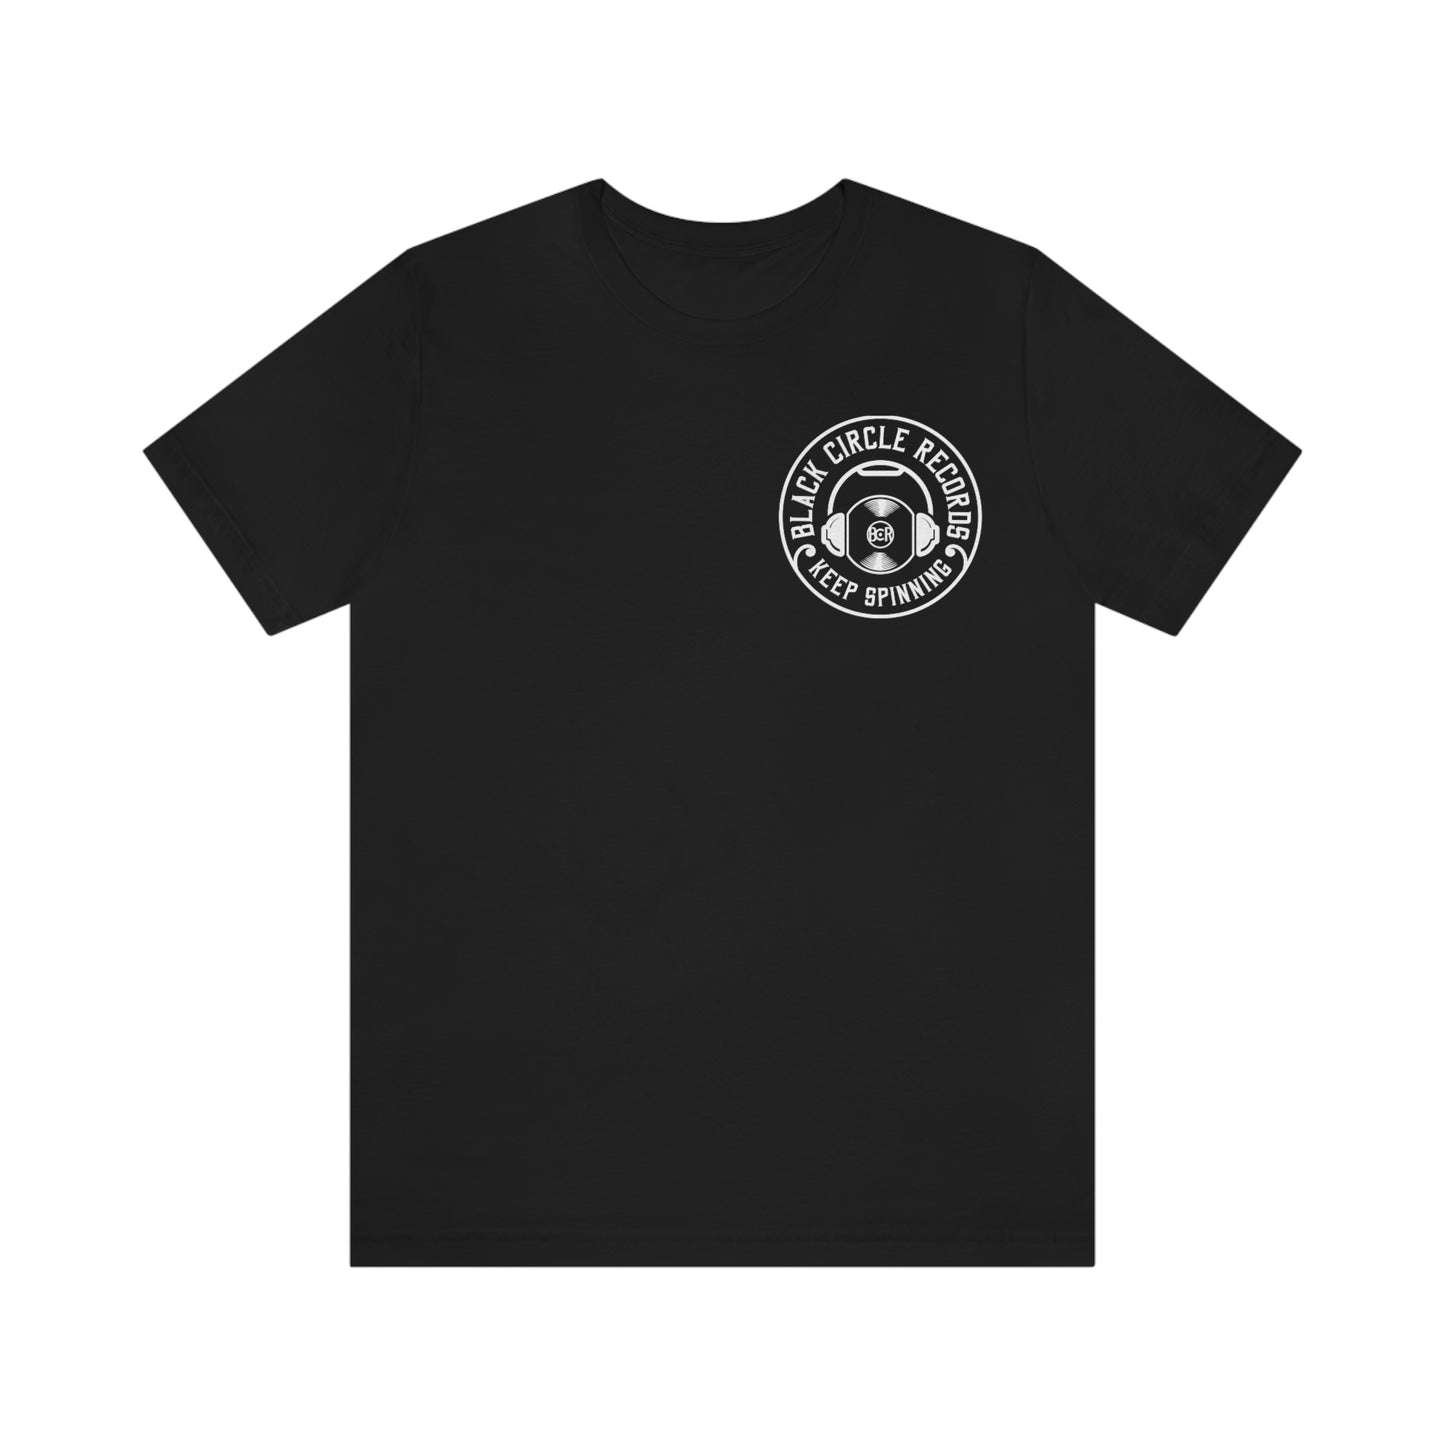 Black Circle Records Dual Sided Tee - Record Store